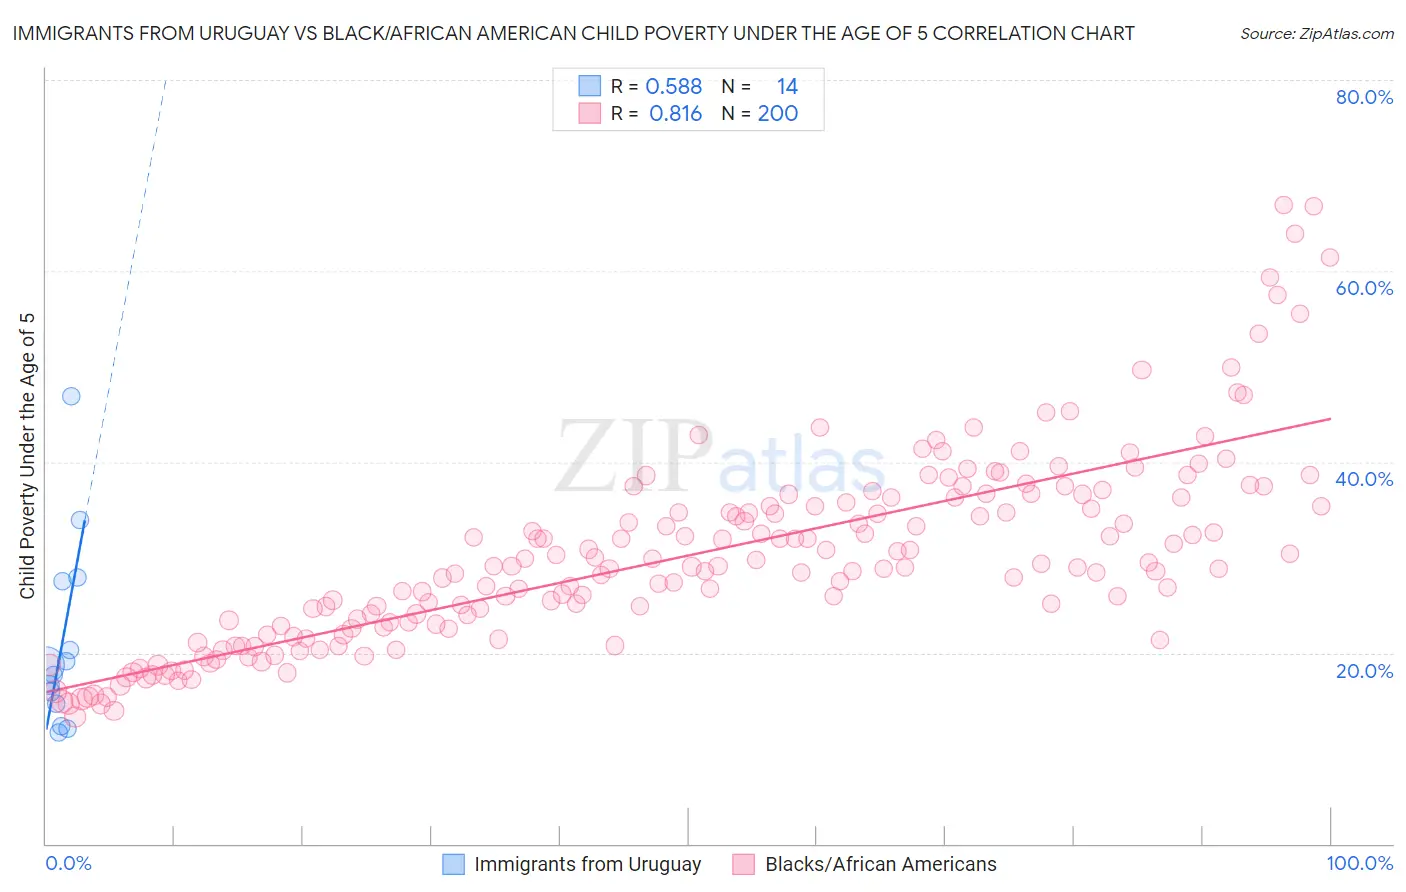 Immigrants from Uruguay vs Black/African American Child Poverty Under the Age of 5